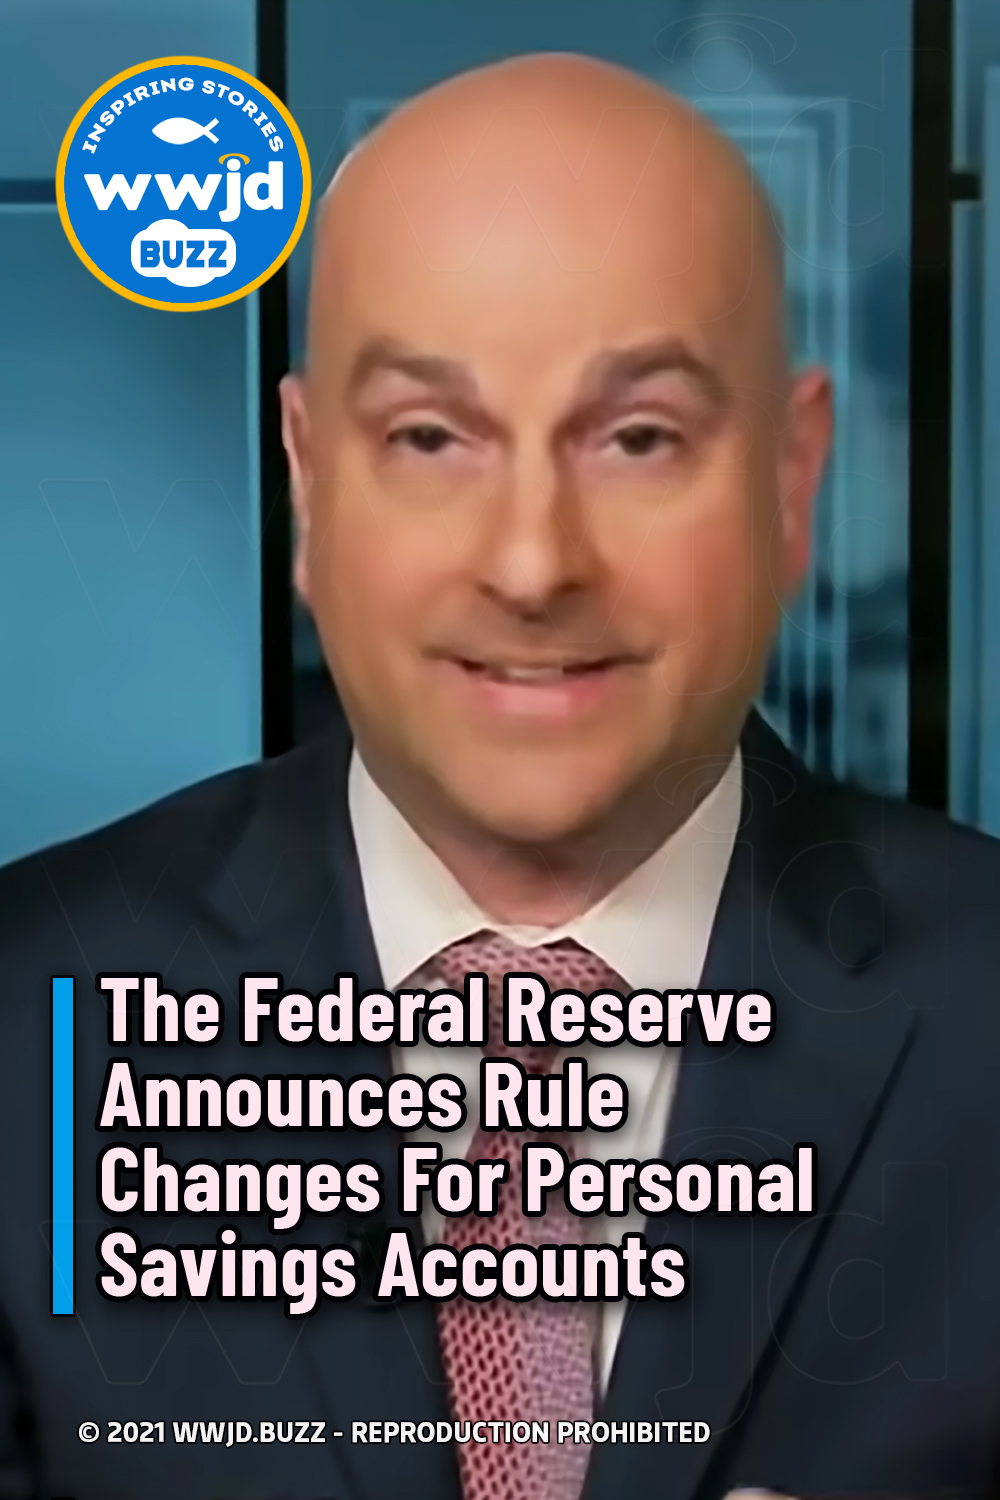 The Federal Reserve Announces Rule Changes For Personal Savings Accounts